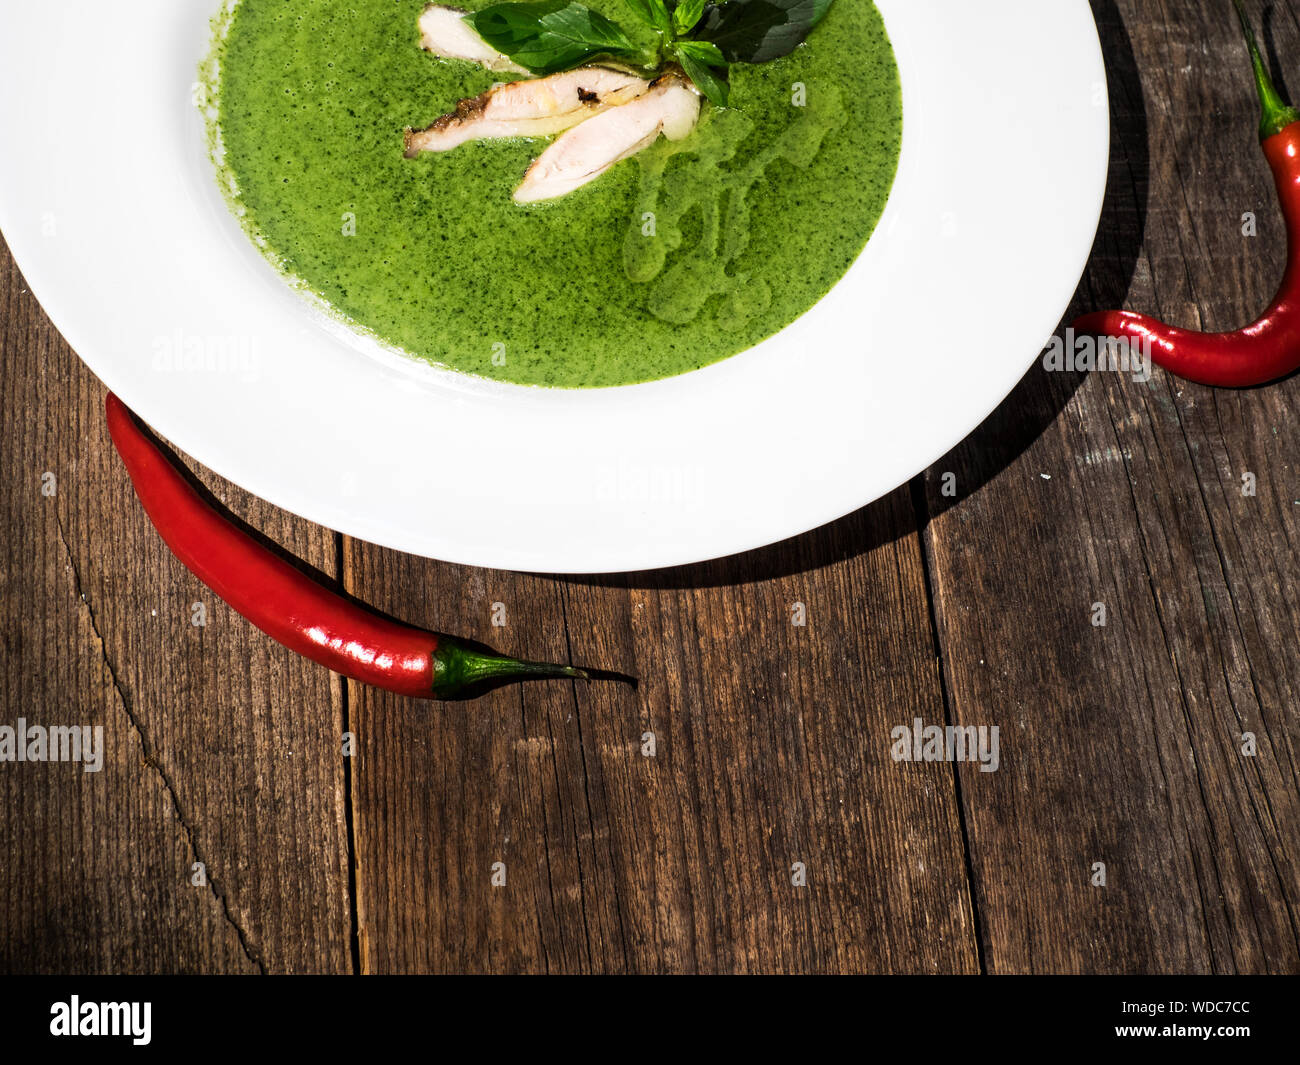 High Angle View Of Spinach Creamy Soup Served In Plate With Red Chilies Stock Photo